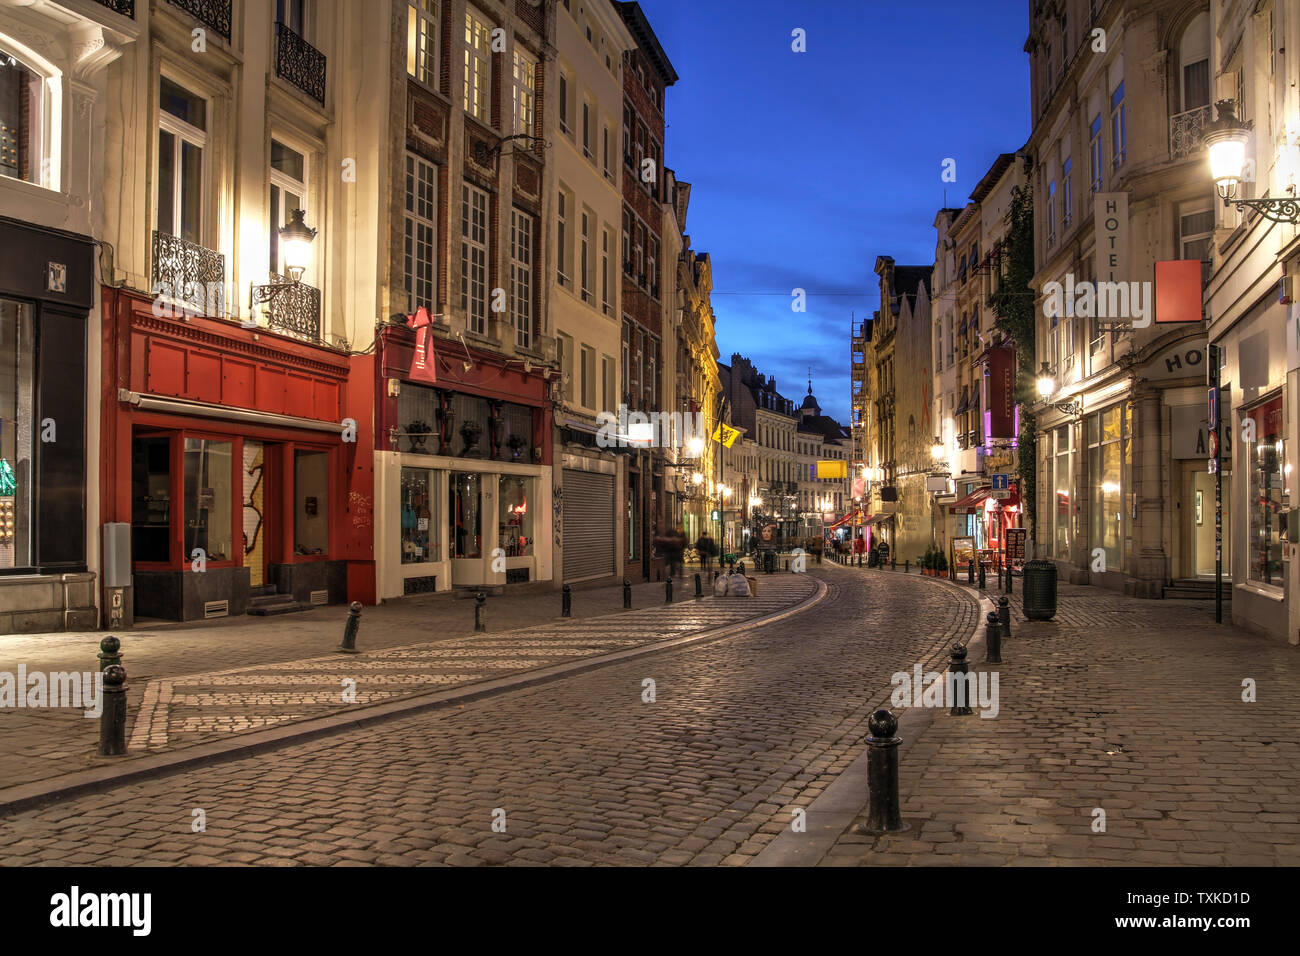 A winding street in downtown Brussels, Belgium at night. Stock Photo